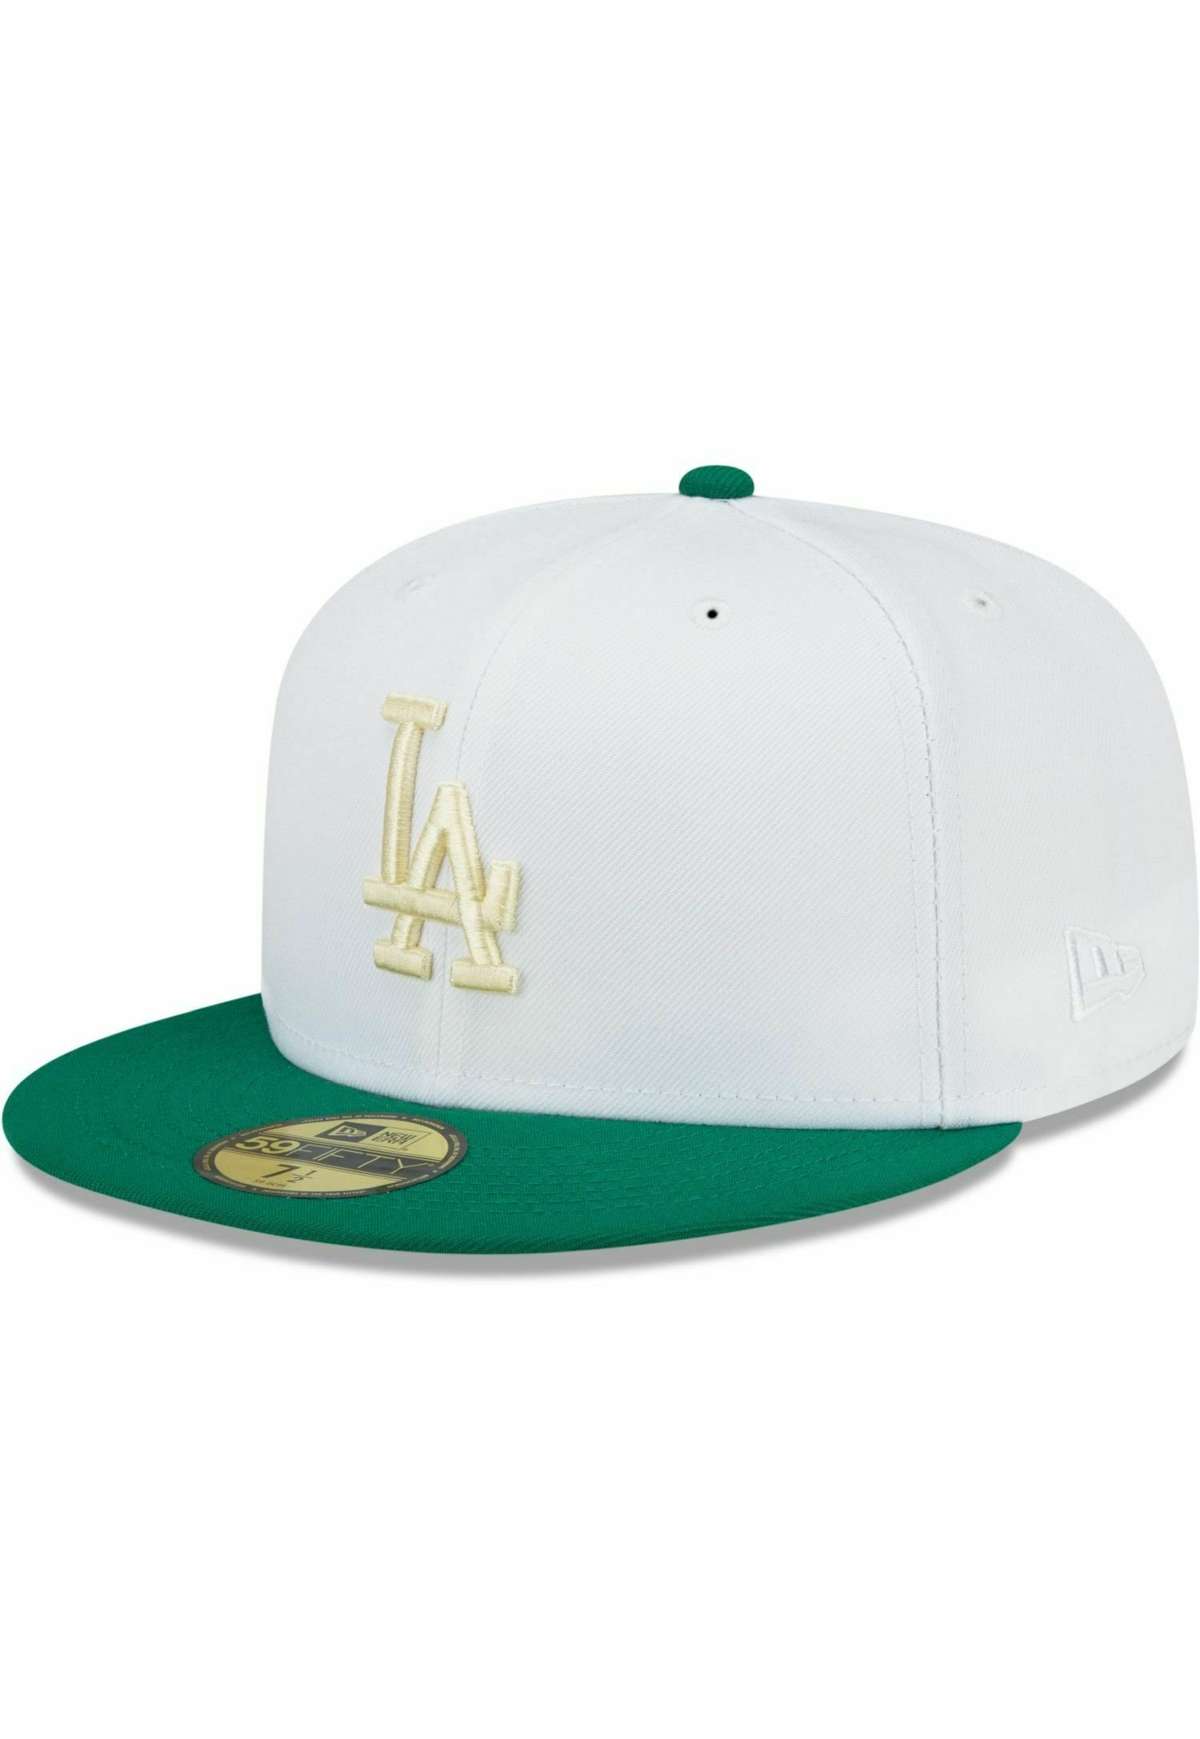 Кепка 59FIFTY FITTED ANNIVERSARY LOS ANGELES DODGERS